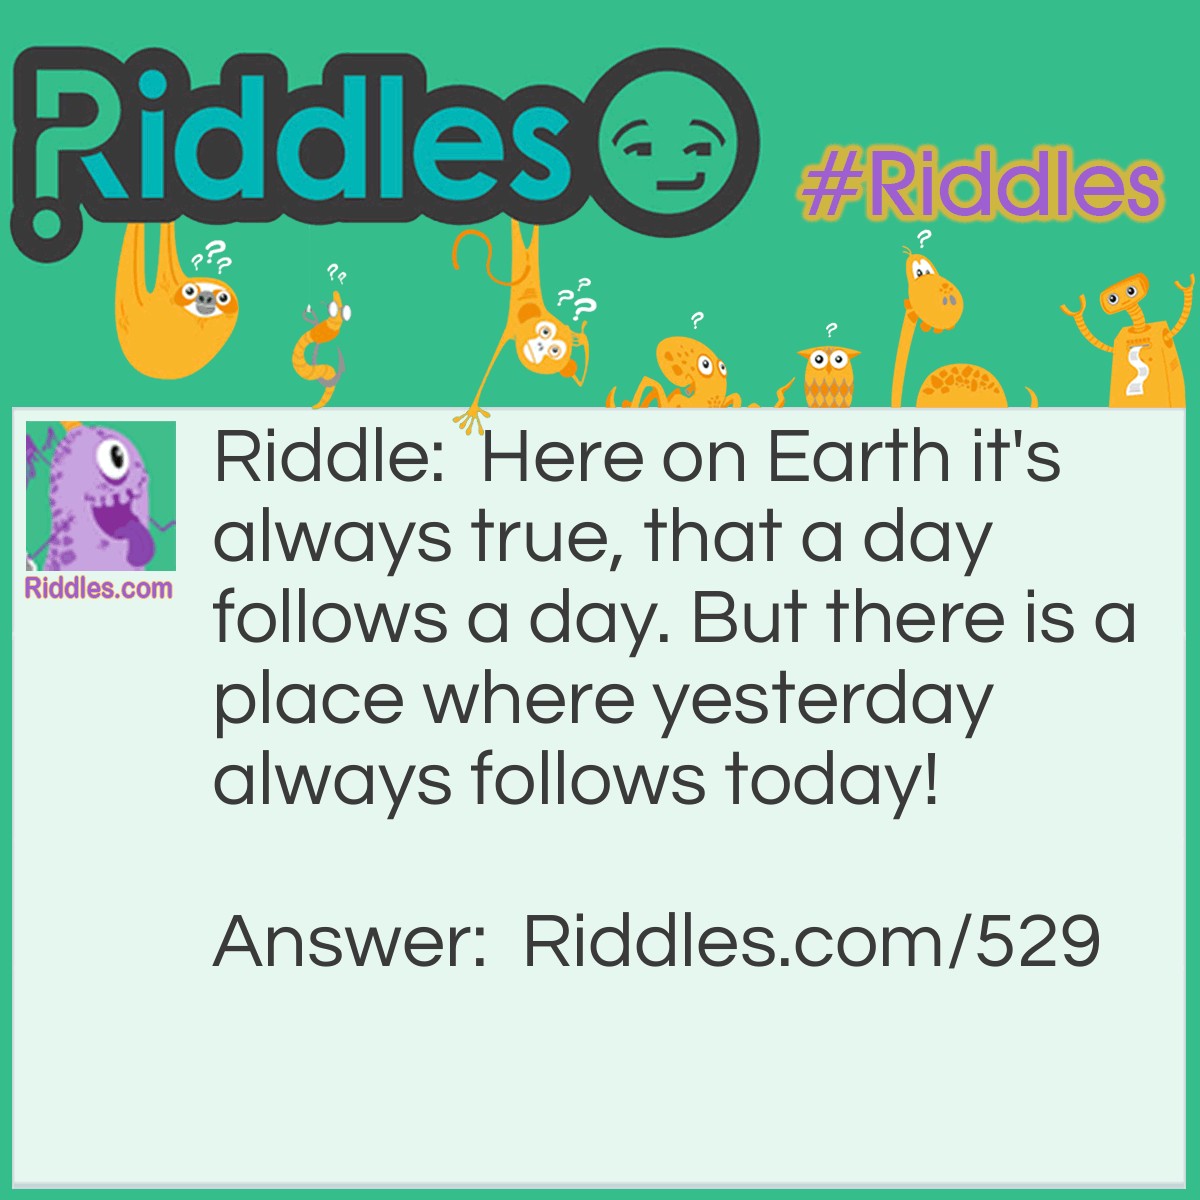 Riddle: Here on Earth, it's always true, that a day follows a day. But there is a place where yesterday always follows today! Where? Answer: In a dictionary.